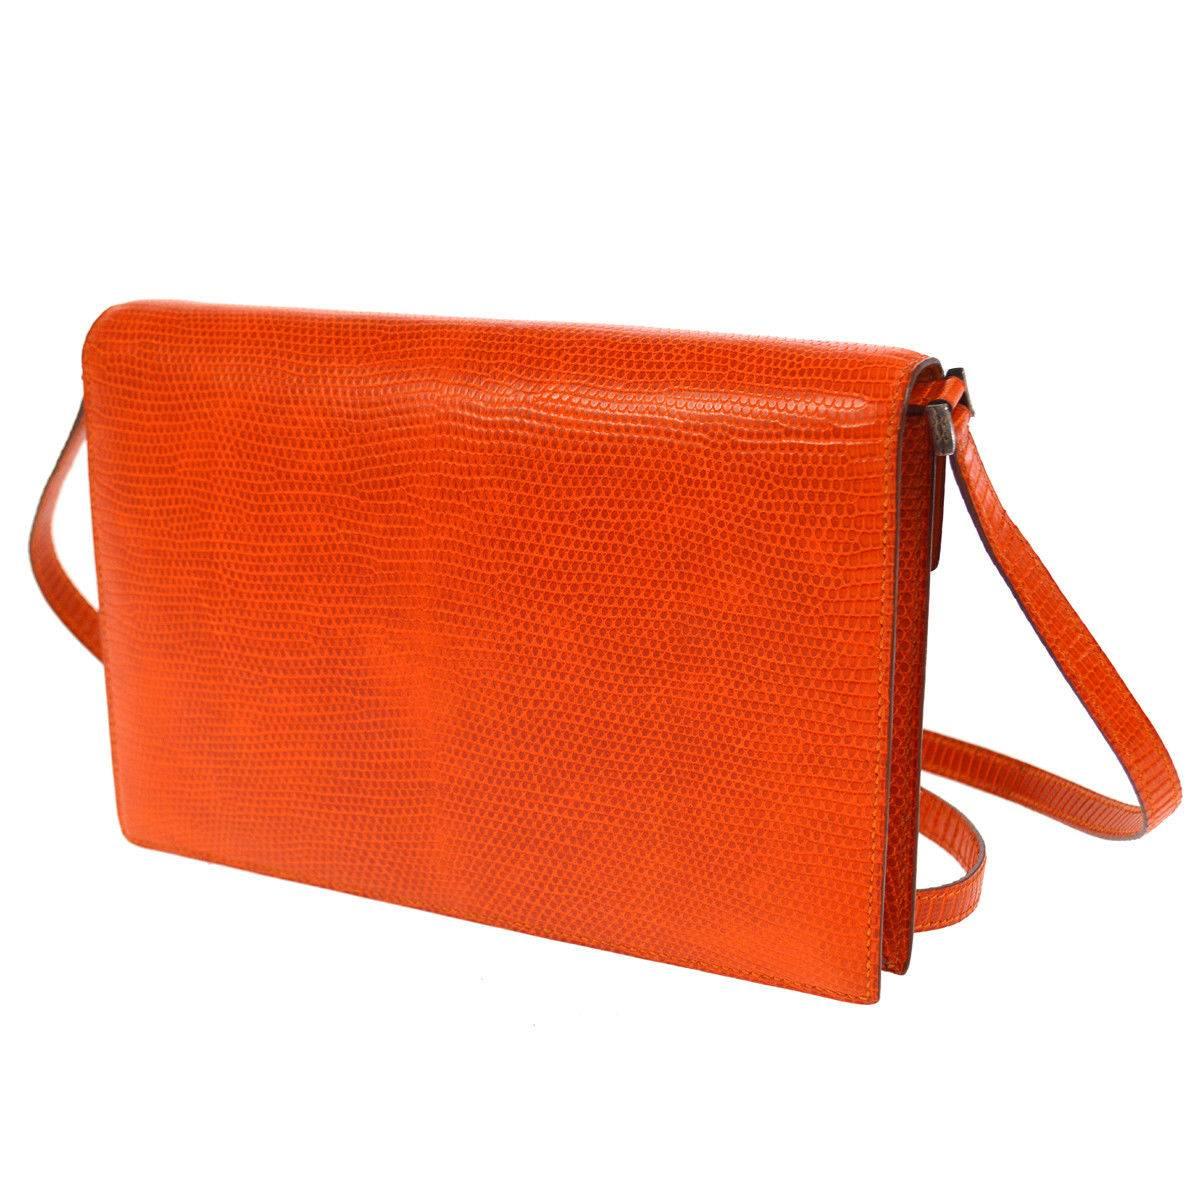 Hermes Limited Edition Lizard Leather Envelope Evening Clutch Shoulder Flap Bag In Good Condition In Chicago, IL